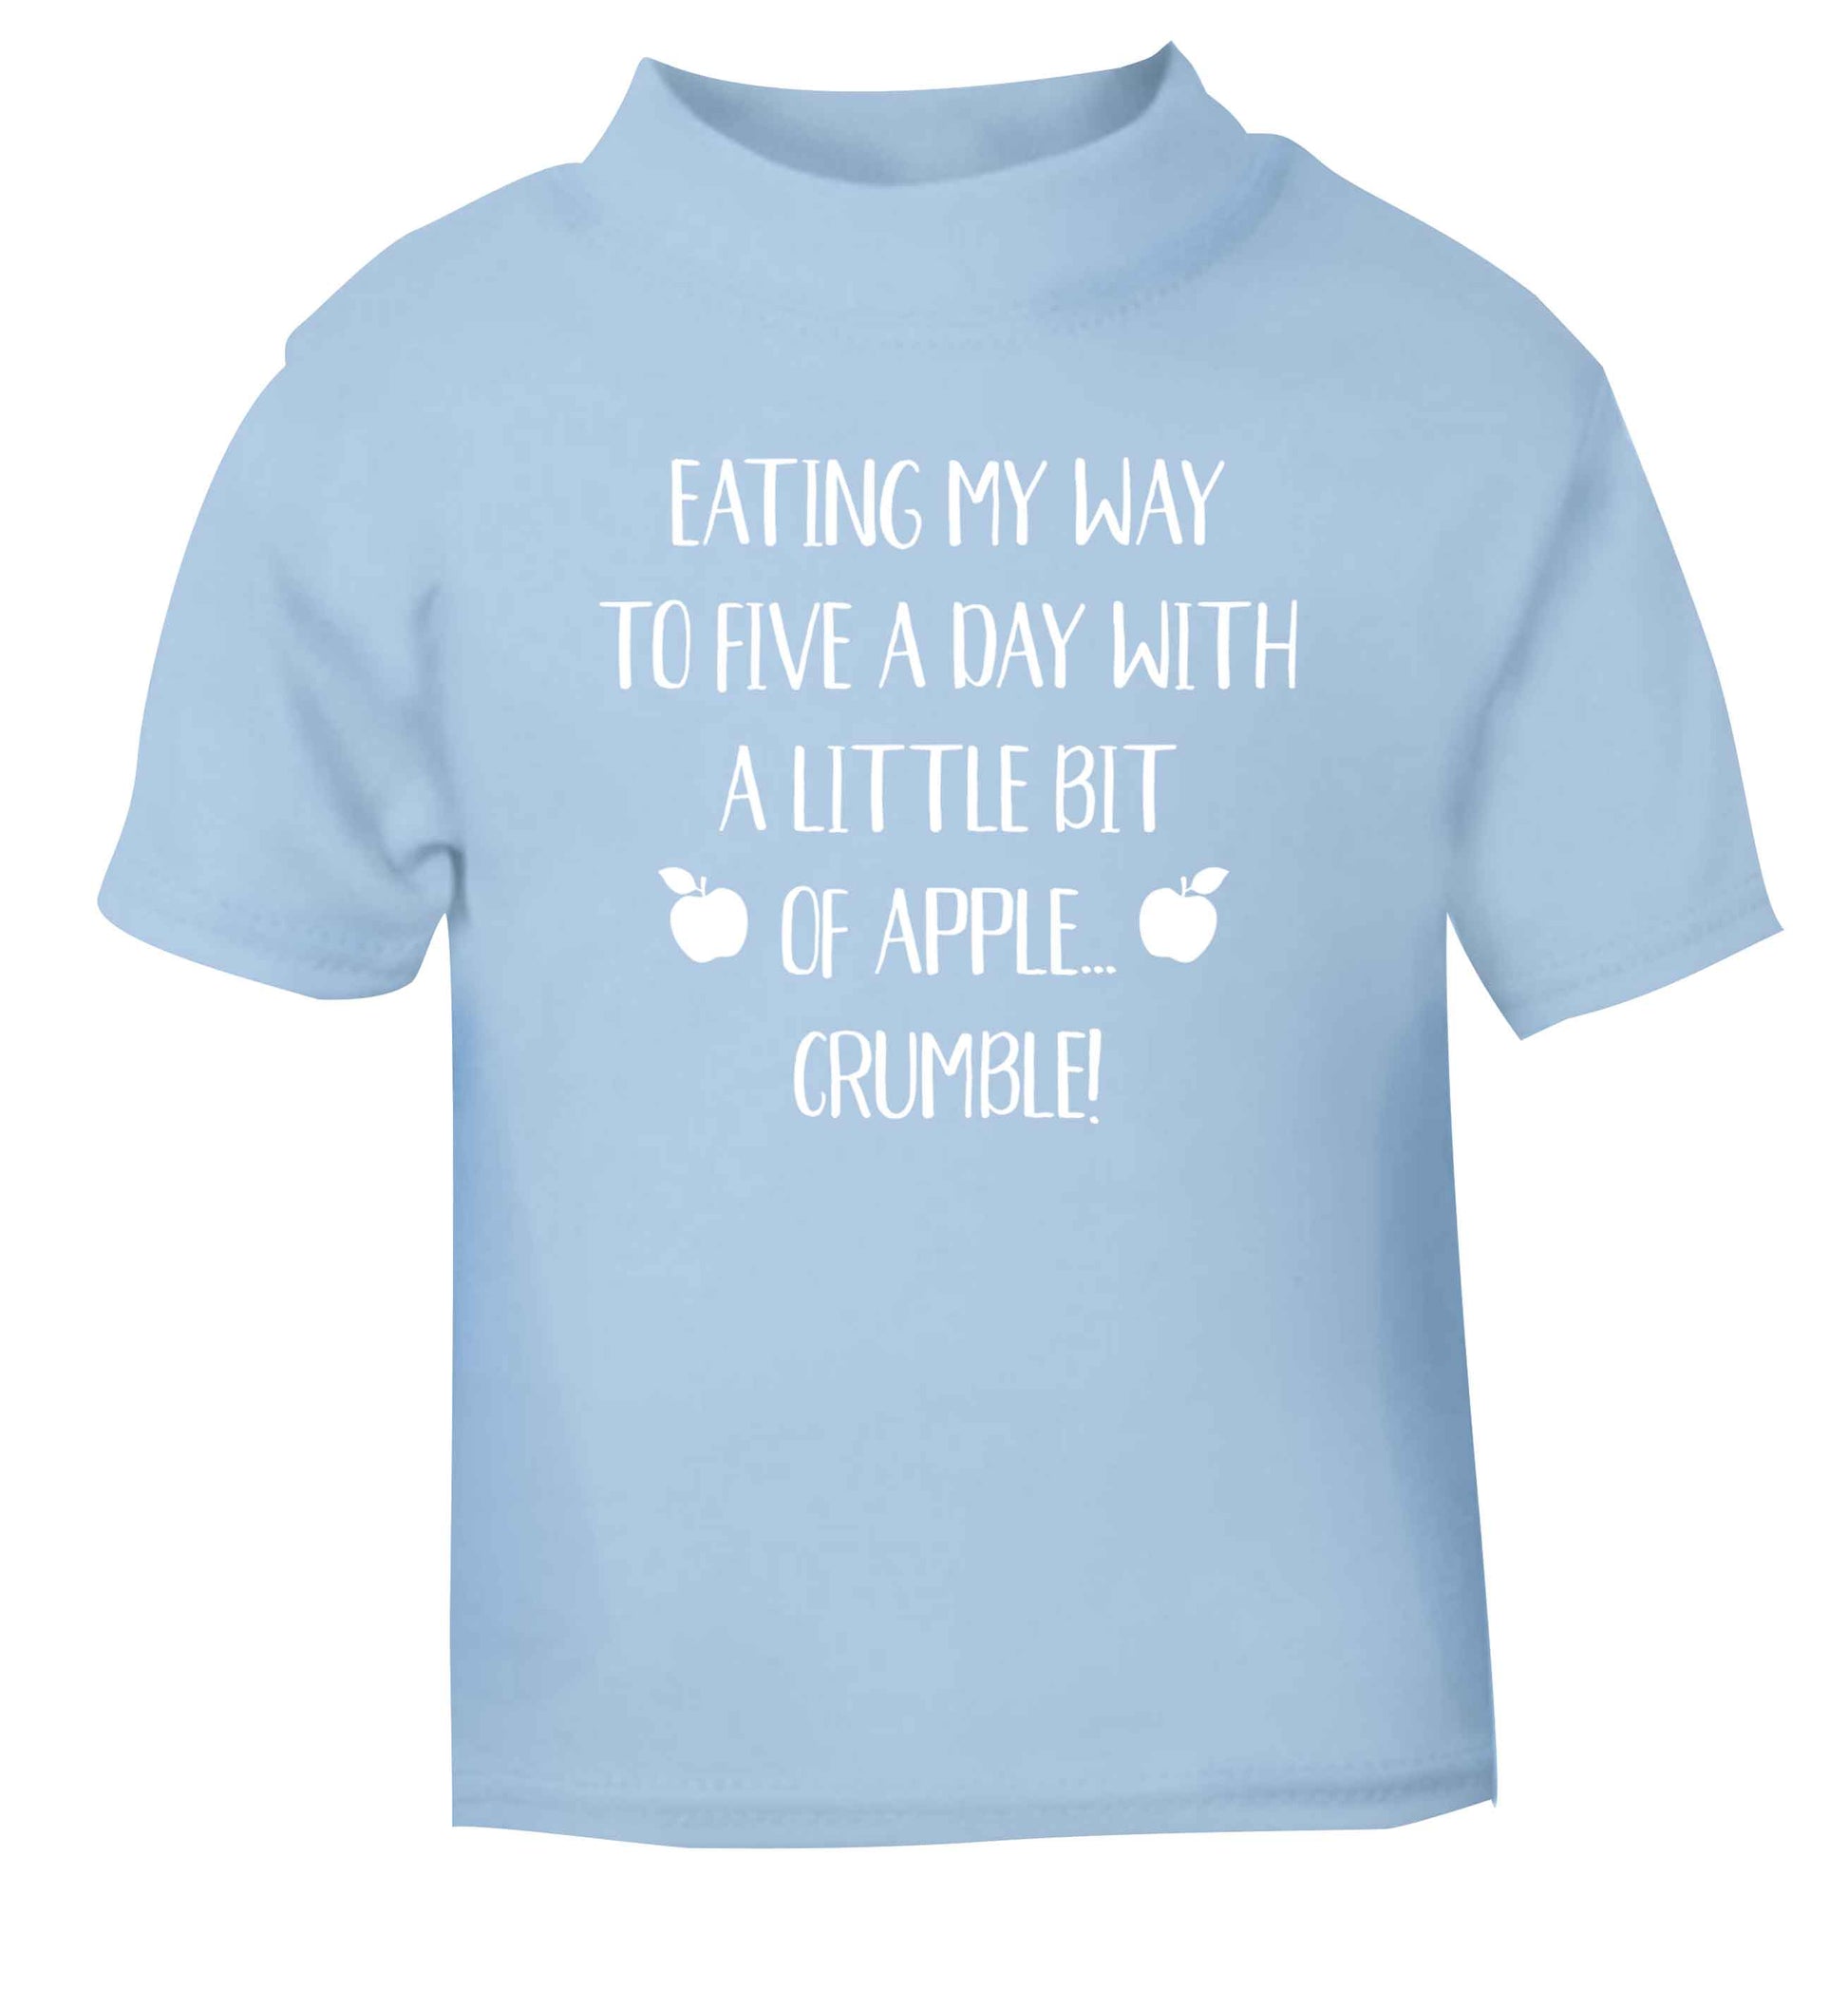 Eating my way to five a day with a little bit of apple crumble light blue Baby Toddler Tshirt 2 Years